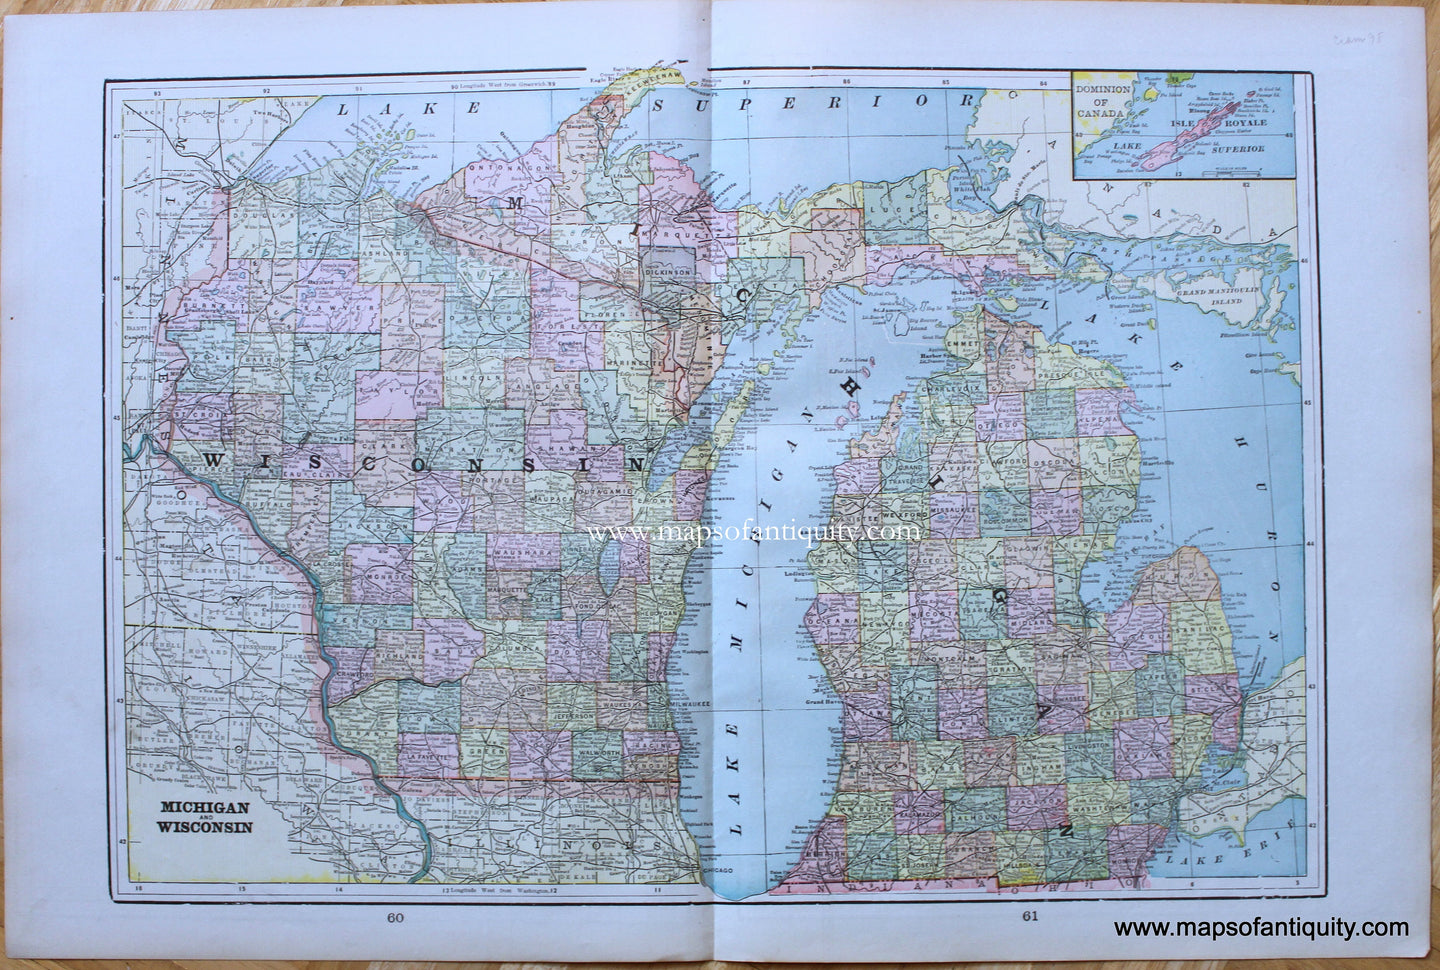 Antique-Printed-Color-Map-Michigan-and-Wisconsin-verso:-Missouri-and-Iowa-North-America-Midwest-1900-Cram-Maps-Of-Antiquity